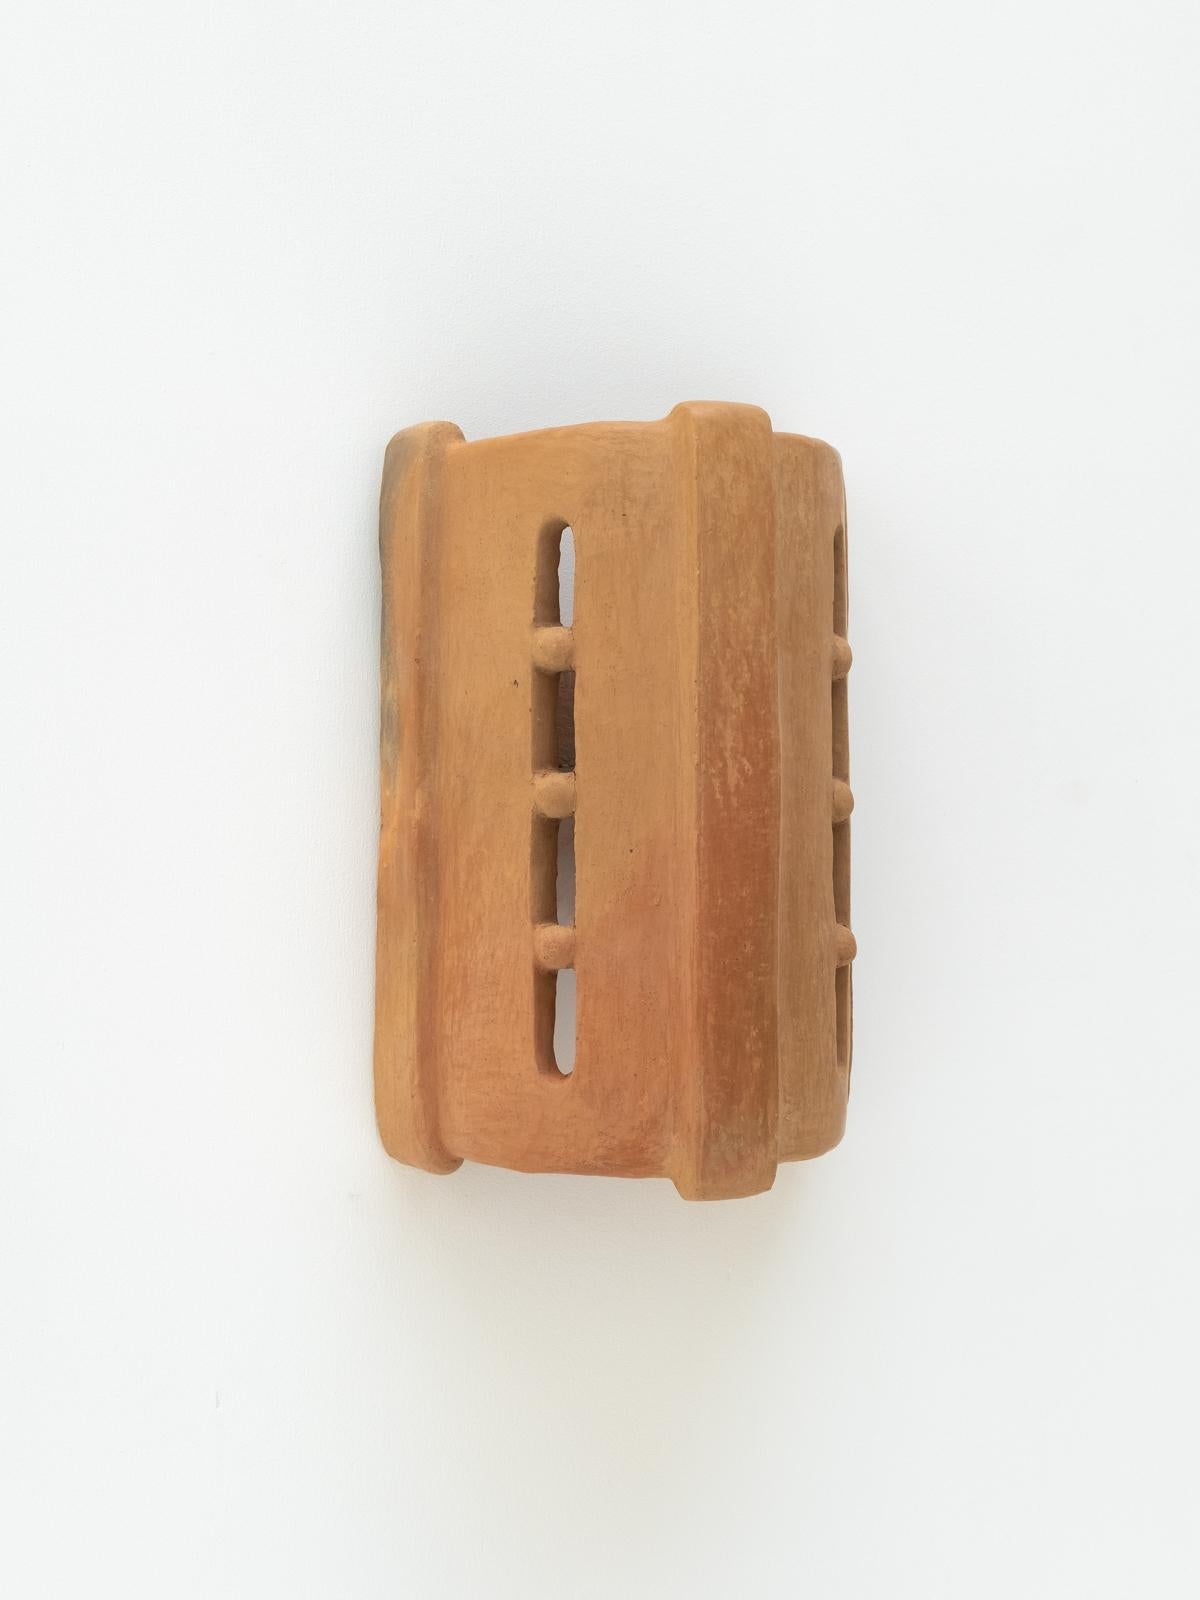 - Handbuilt terracotta ceramic wall light
- made of clay collected from the potter's surroundings.
- made in the Moroccan Rif mountains by the potter Houda.
- co-created by the potter Houda x memòri team
- small scale-production
- an extra fixing is